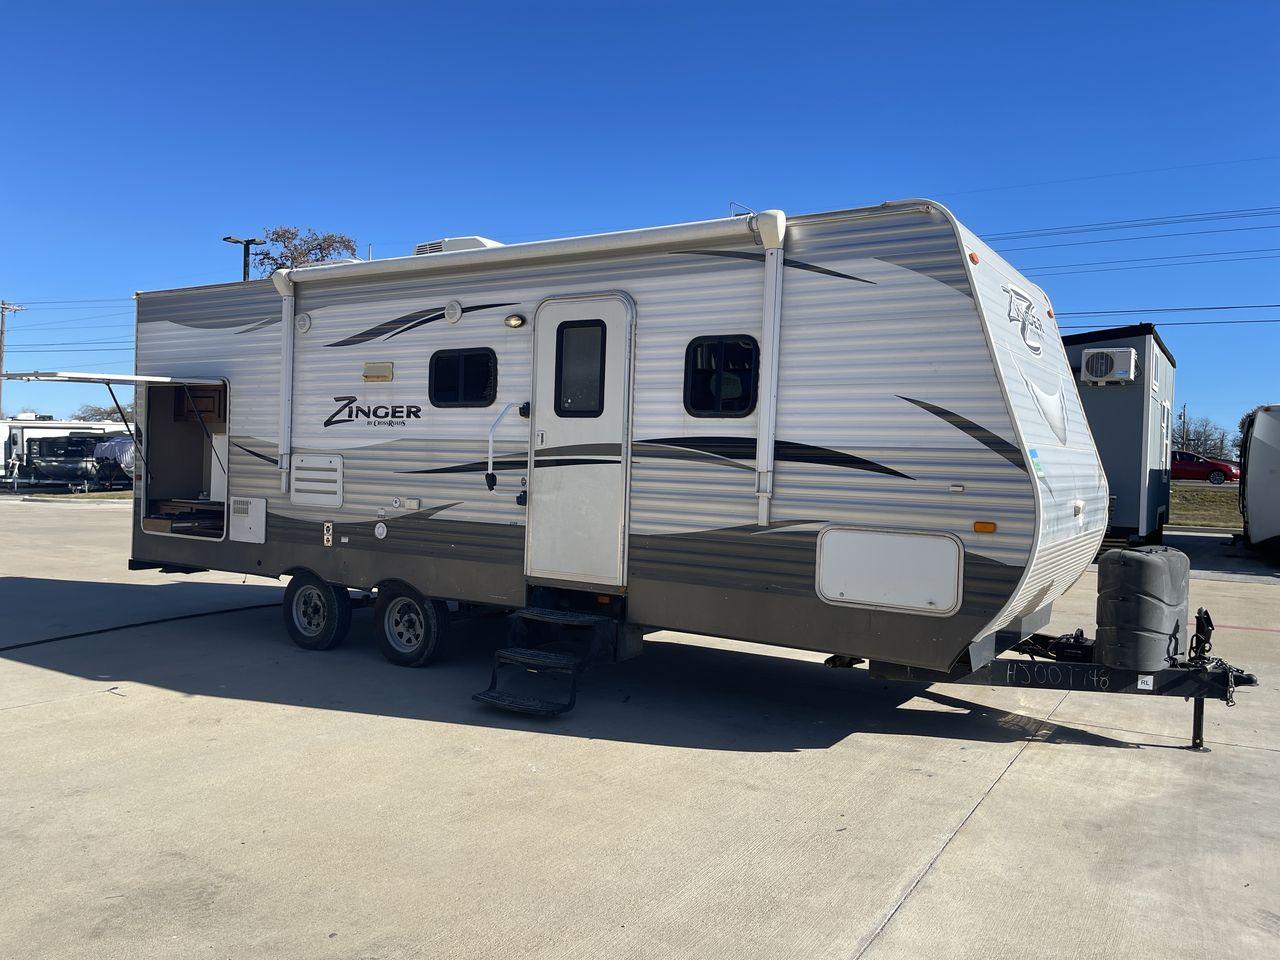 2017 WHITE CROSSROADS ZINGER 25RB (4V0TC2523HJ) , Length: 29.5 ft. | Dry Weight: 6,276 lbs. | Gross Weight: 7,870 lbs. | Slides: 1 transmission, located at 4319 N Main St, Cleburne, TX, 76033, (817) 678-5133, 32.385960, -97.391212 - The 2017 Crossroads Zinger 25RB is designed to elevate your camping adventures with exceptional comfort and versatility. Measuring 29.5 feet in length, this model ensures a spacious interior, accentuated by a single slide-out for enhanced roominess. It features a master bedroom that fits a queen-siz - Photo #20